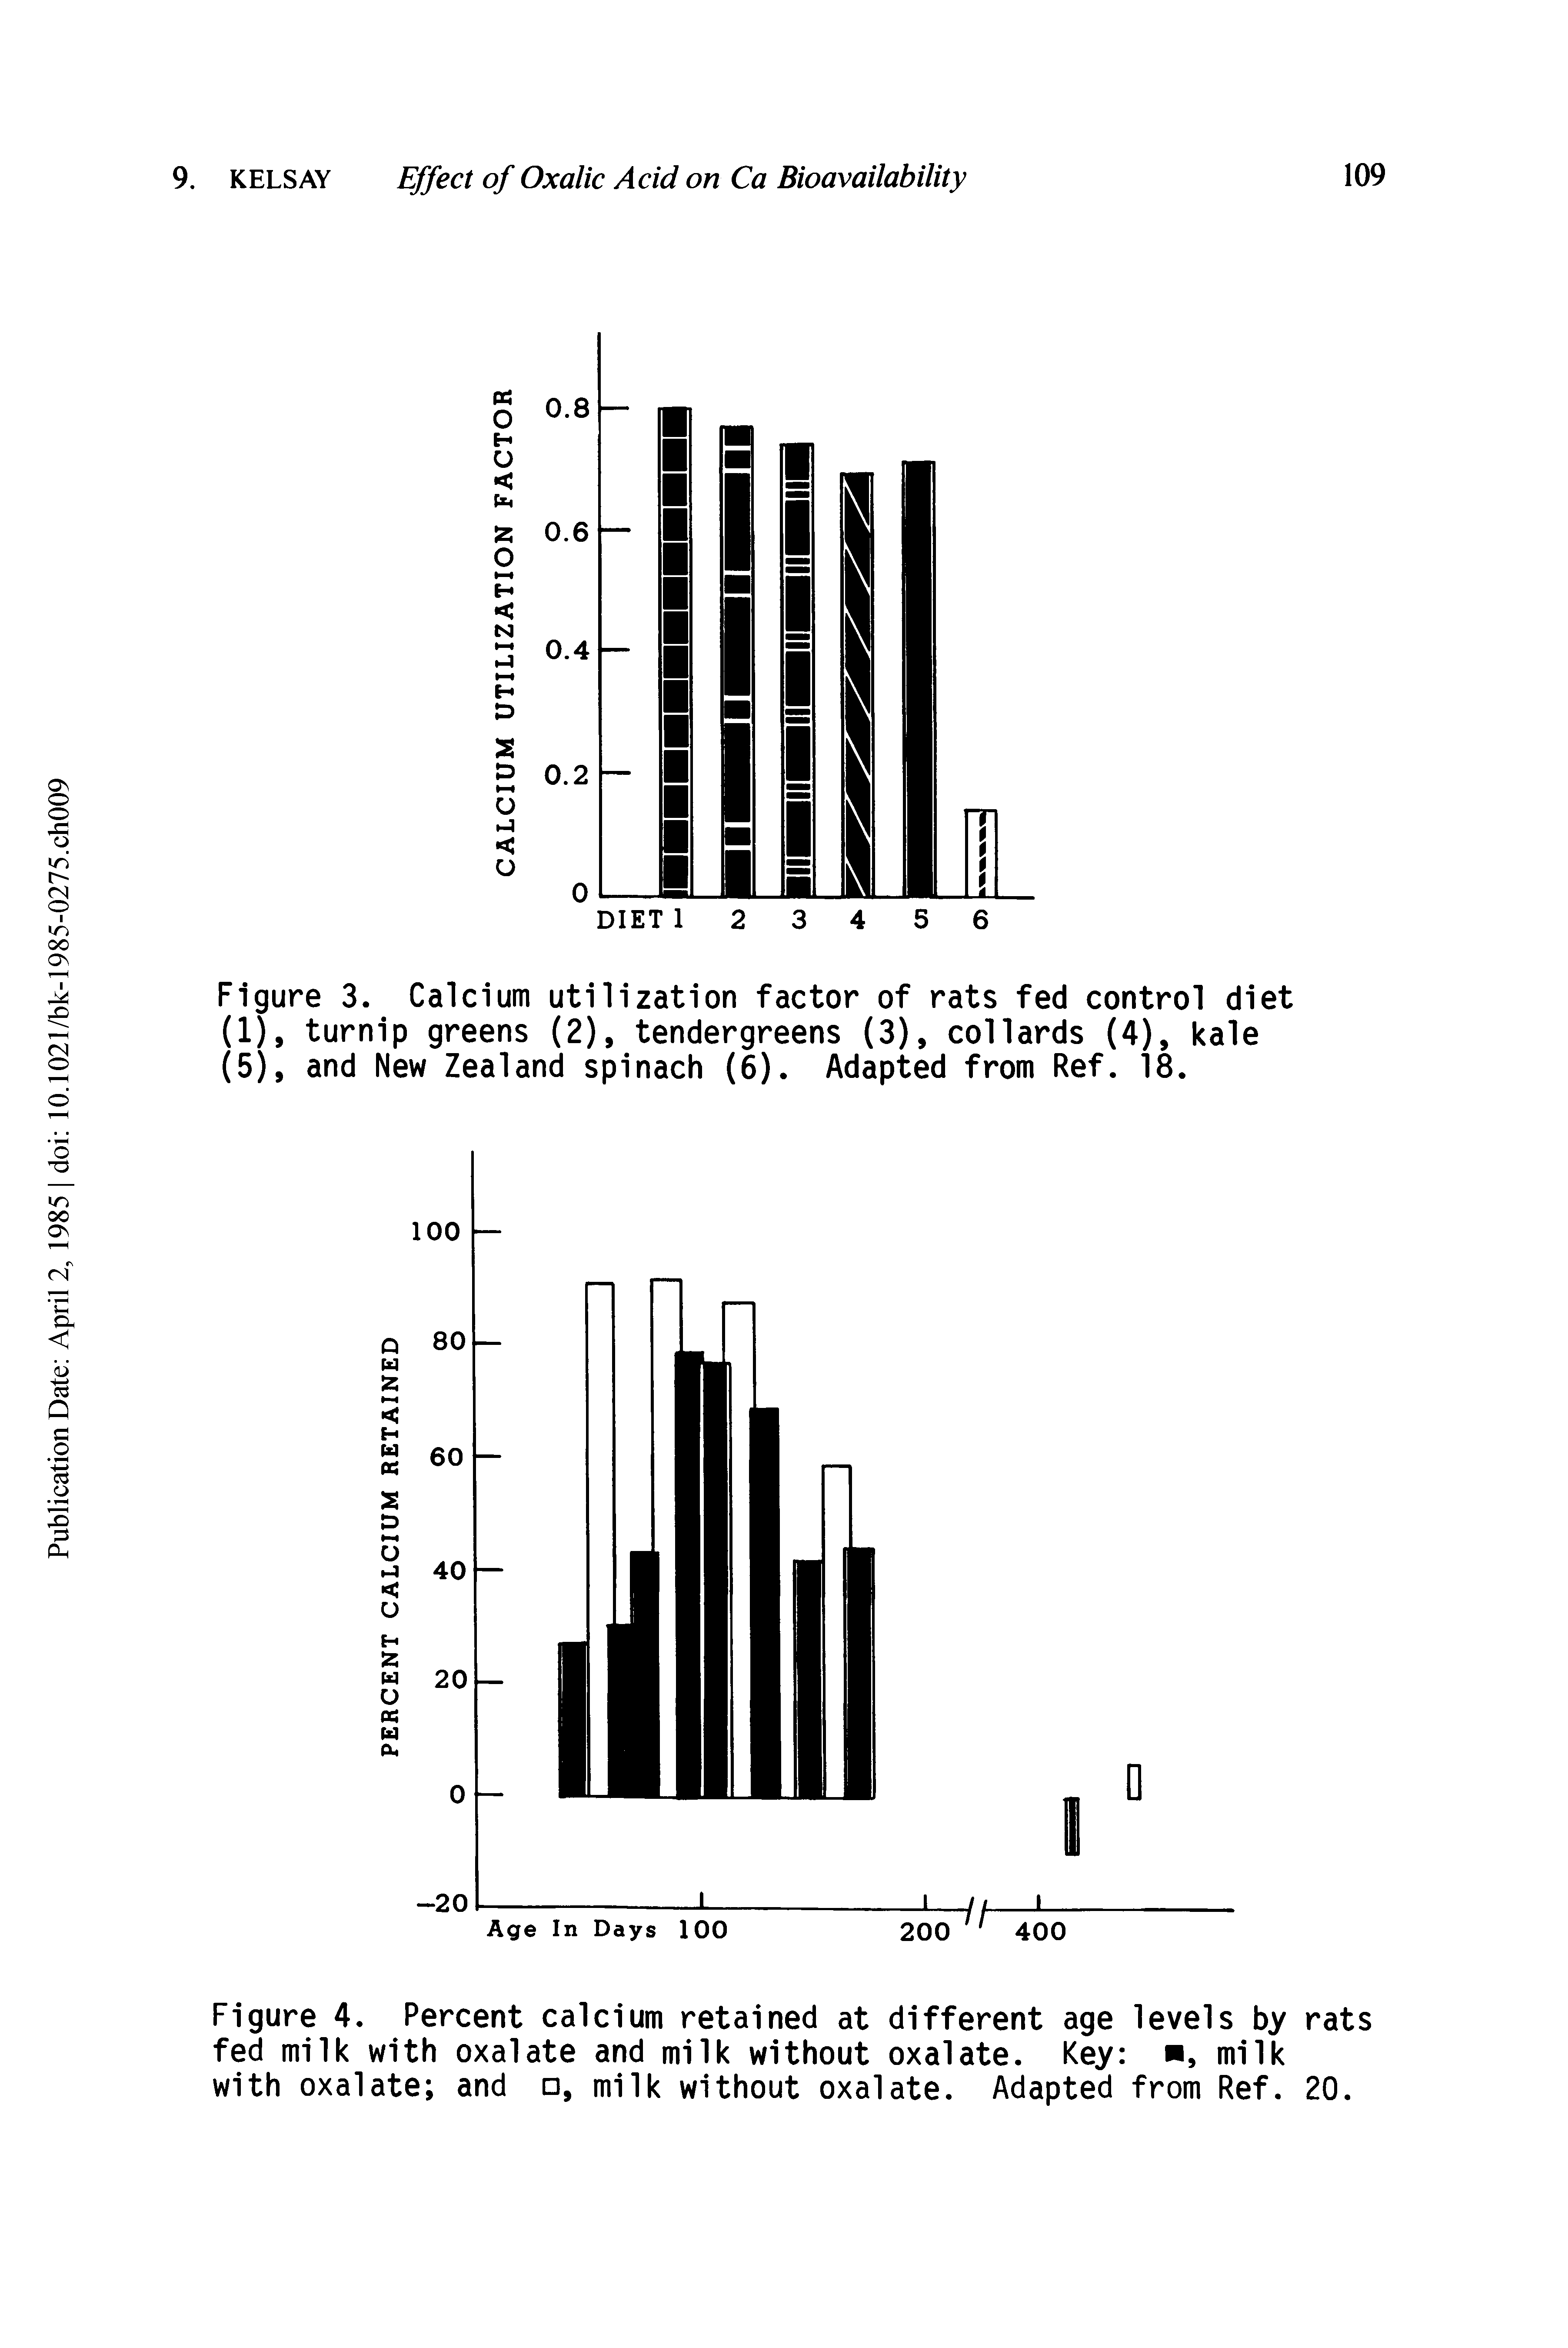 Figure 4. Percent calcium retained at different age levels by fed milk with oxalate and milk without oxalate. Key , milk with oxalate and , milk without oxalate. Adapted from Ref.